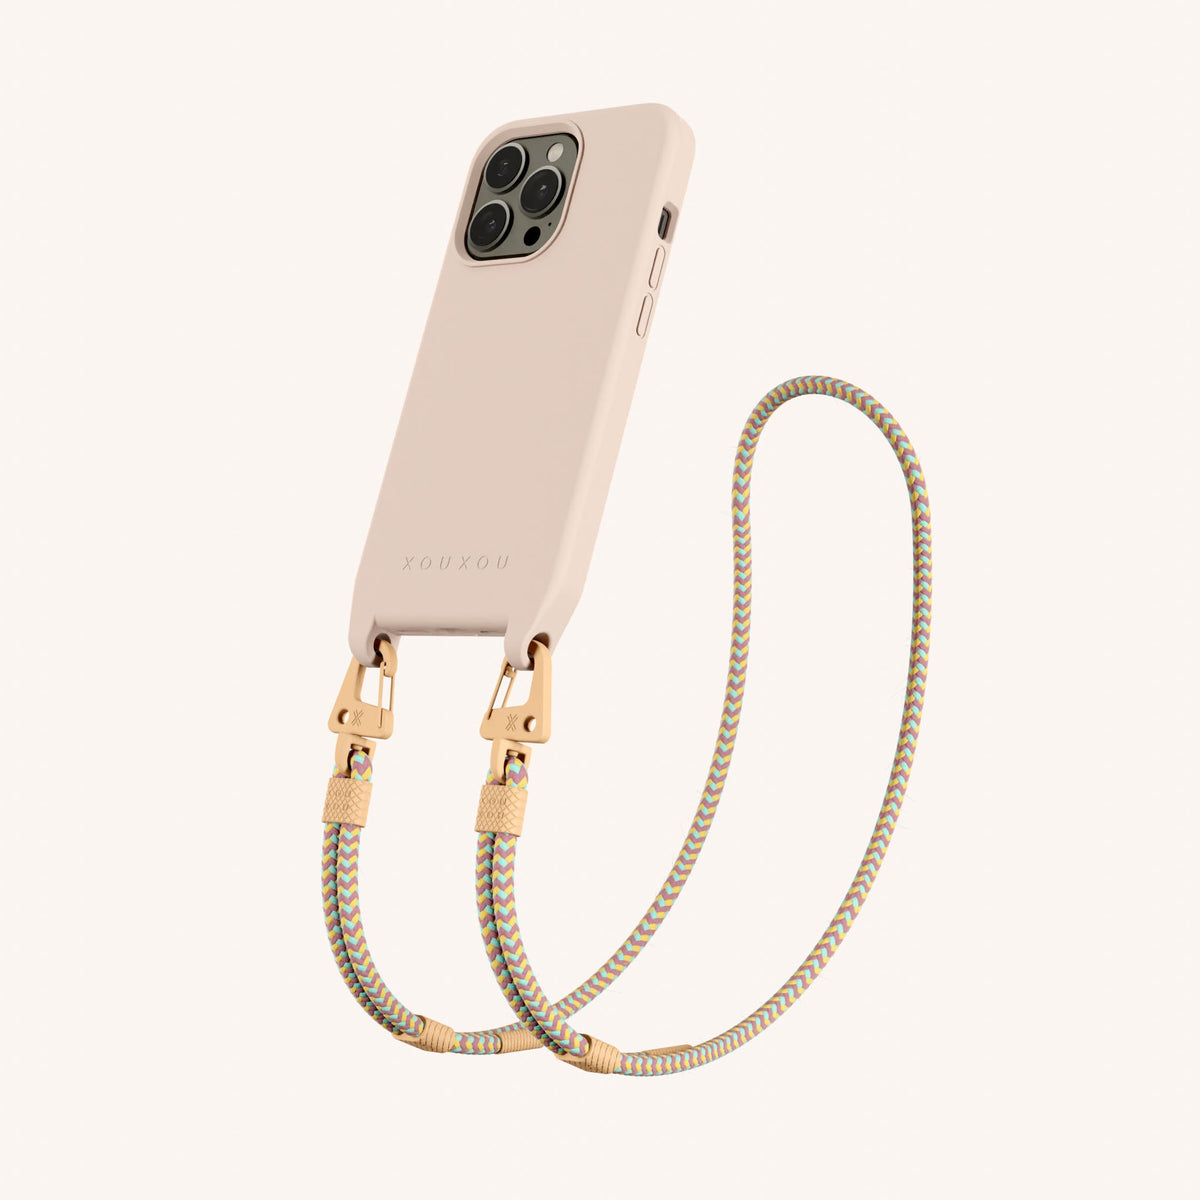 Phone Necklace with Carabiner Rope for iPhone 13 Pro with MagSafe in Powder Pink + Palm Springs Perspective View | XOUXOU #phone model_iphone 13 pro